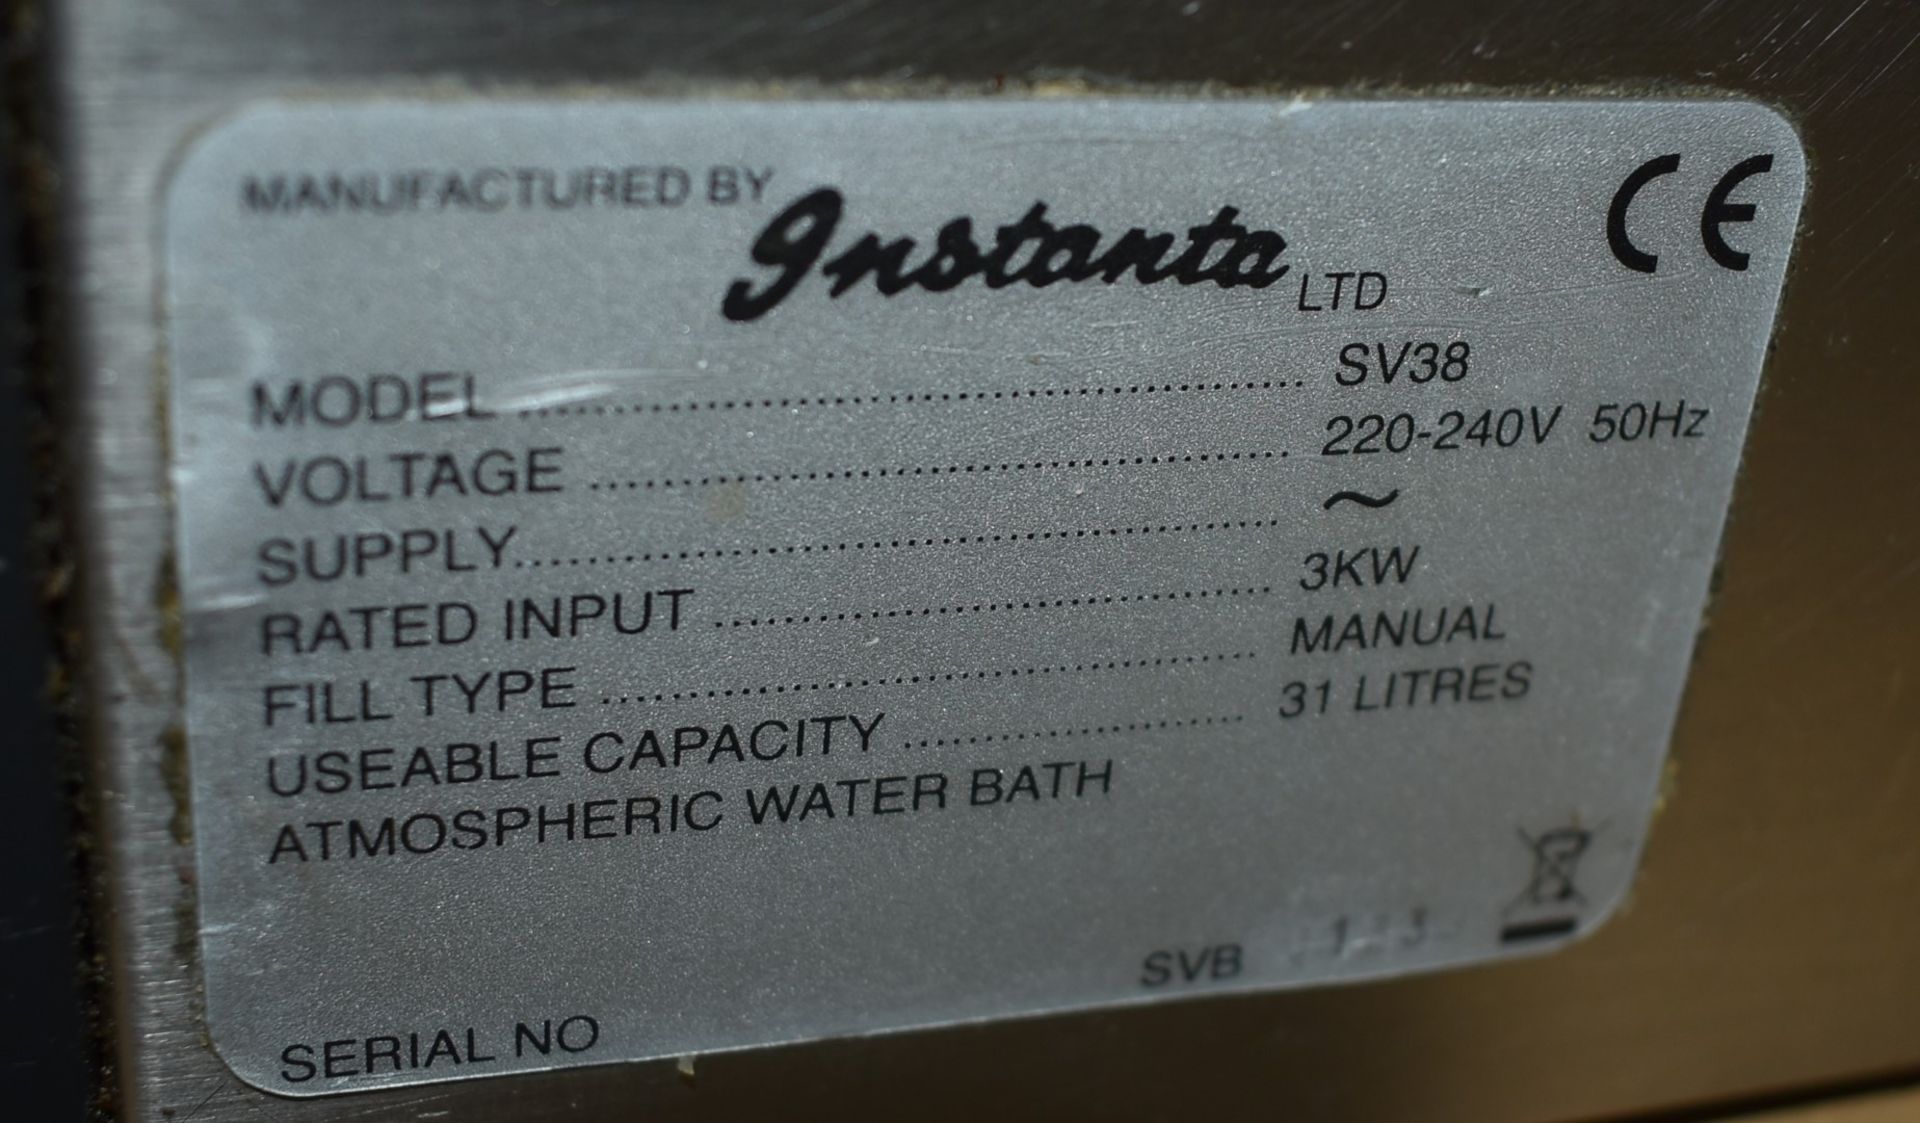 1 x Instanta SV38 Sous Vide Digital Water Bath - CL232 - Ref107 - Stainless Steel Finish - Location: - Image 5 of 5